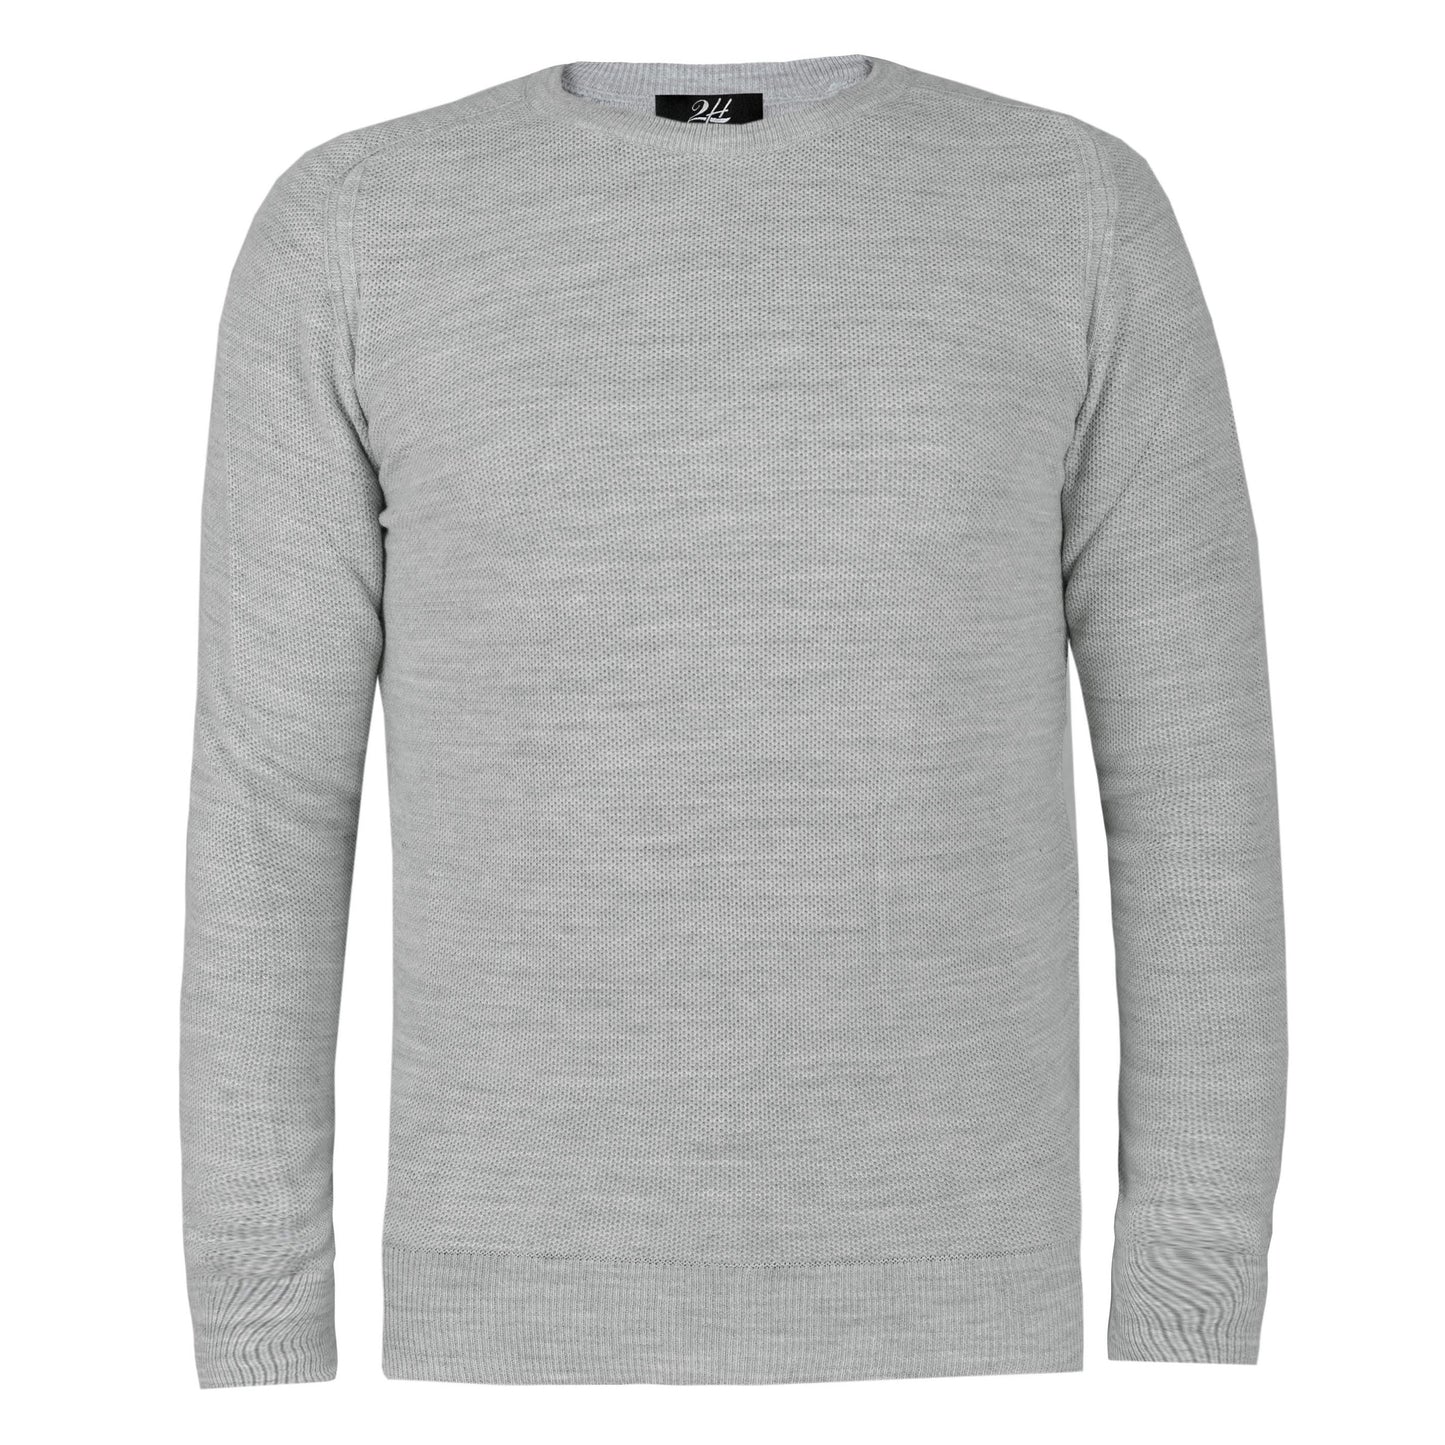 2H Grey Knitted Round Neck Sweater